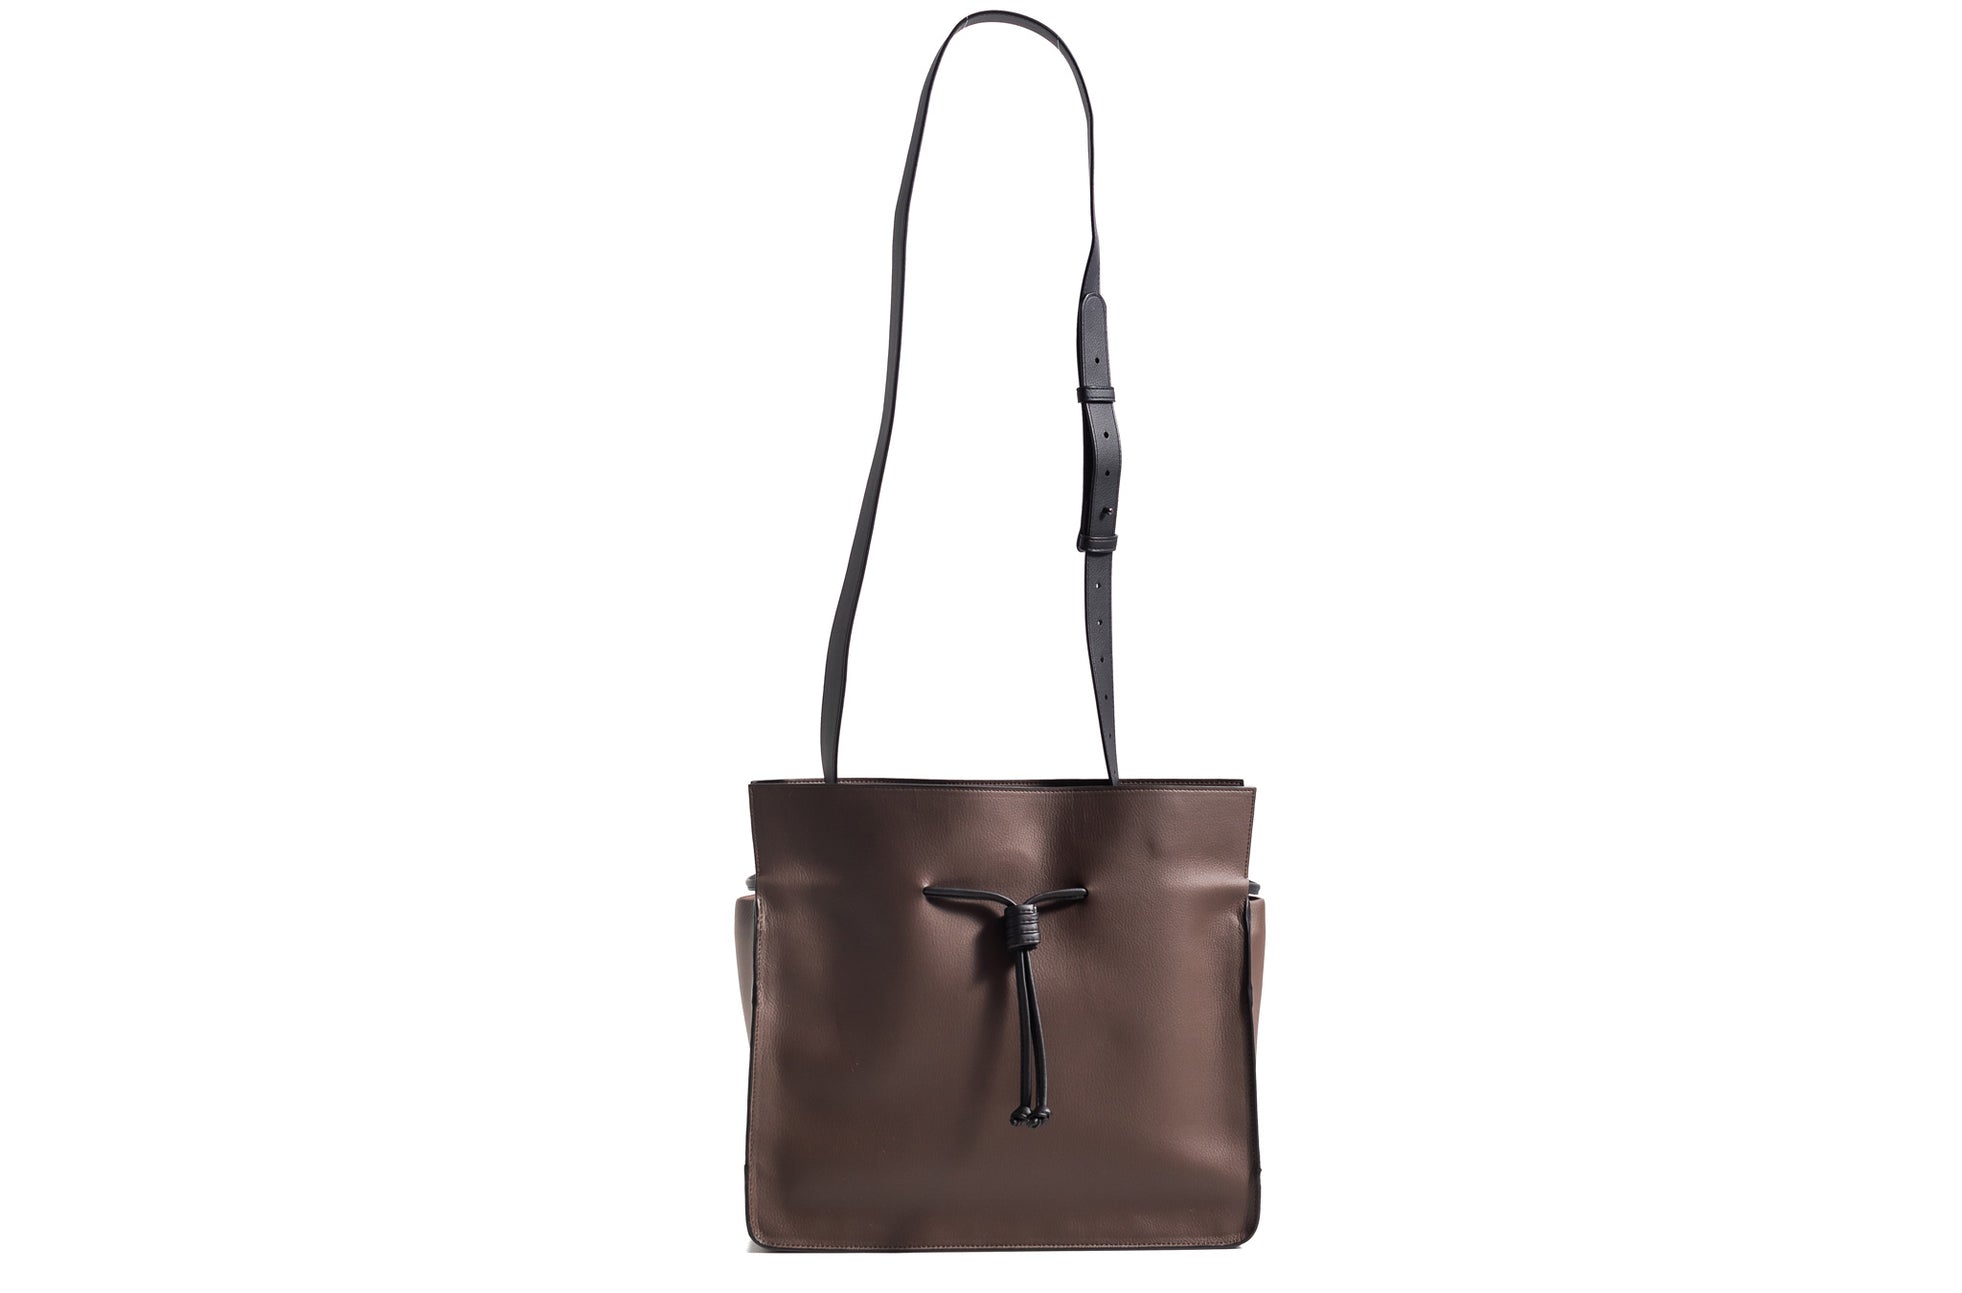 The Medium Shopper in Technik-Leather in Taupe and Black image 4